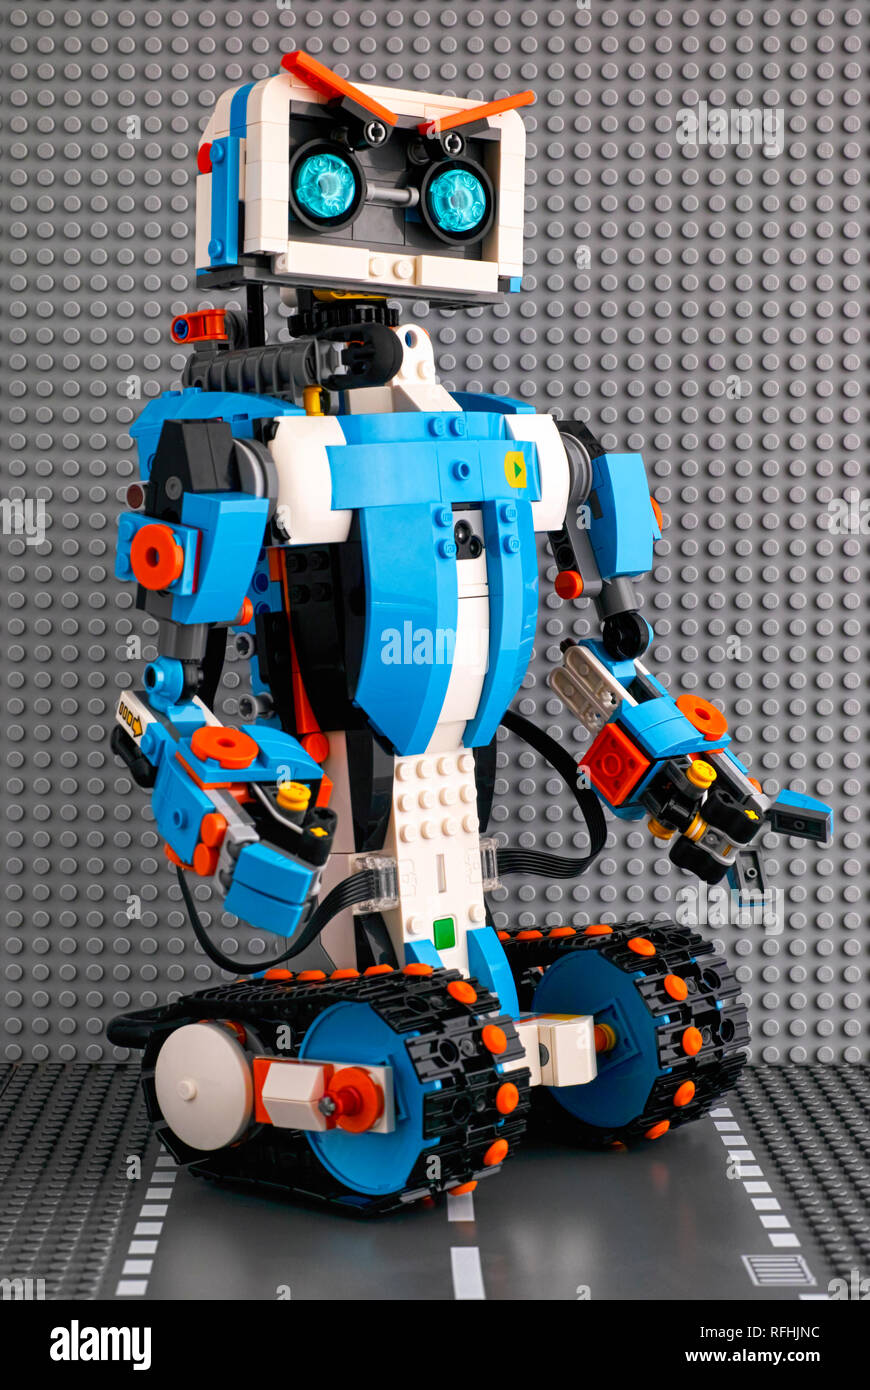 Tambov, Russian Federation - July 27, 2018 Lego BOOST robot standing on the  road baseplate against gray baseplate background Stock Photo - Alamy